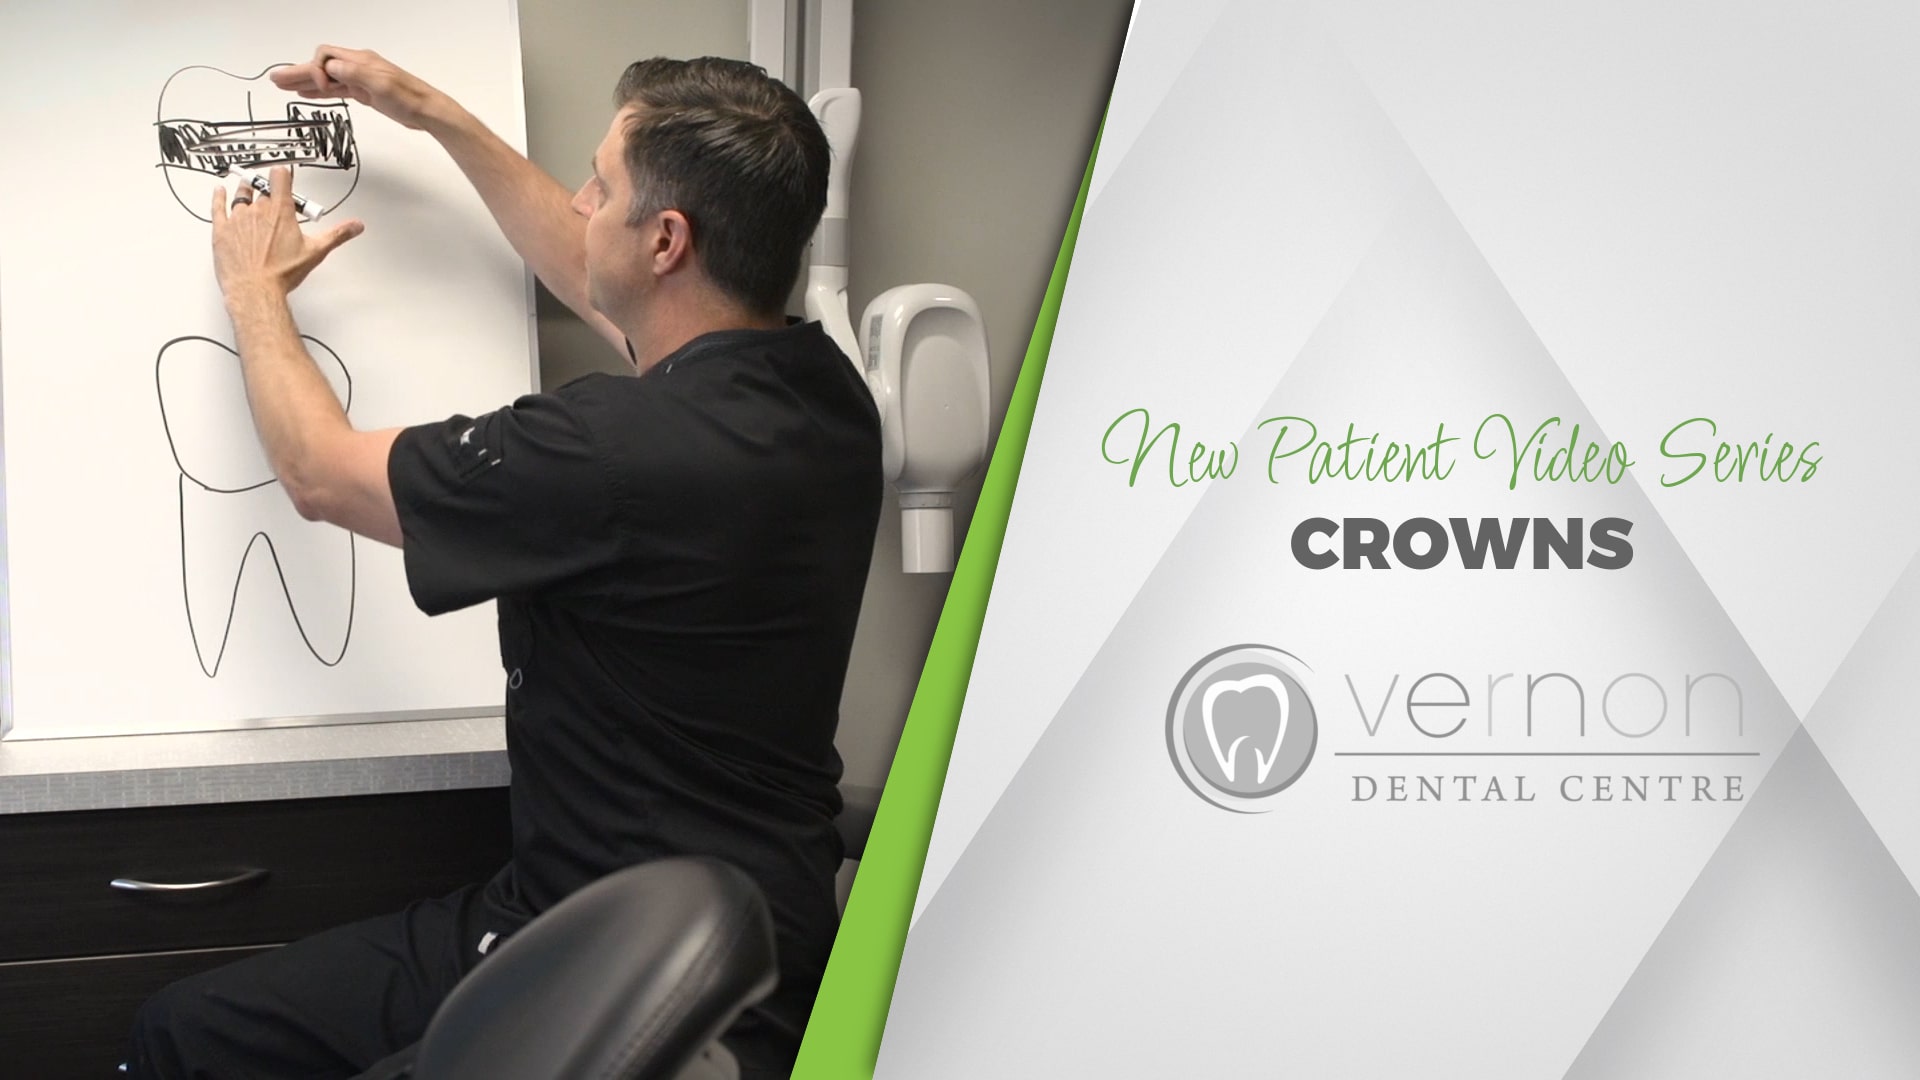 Dr. Anthony Berdan from Vernon Dental Centre discusses what a dental crown is when you would need one